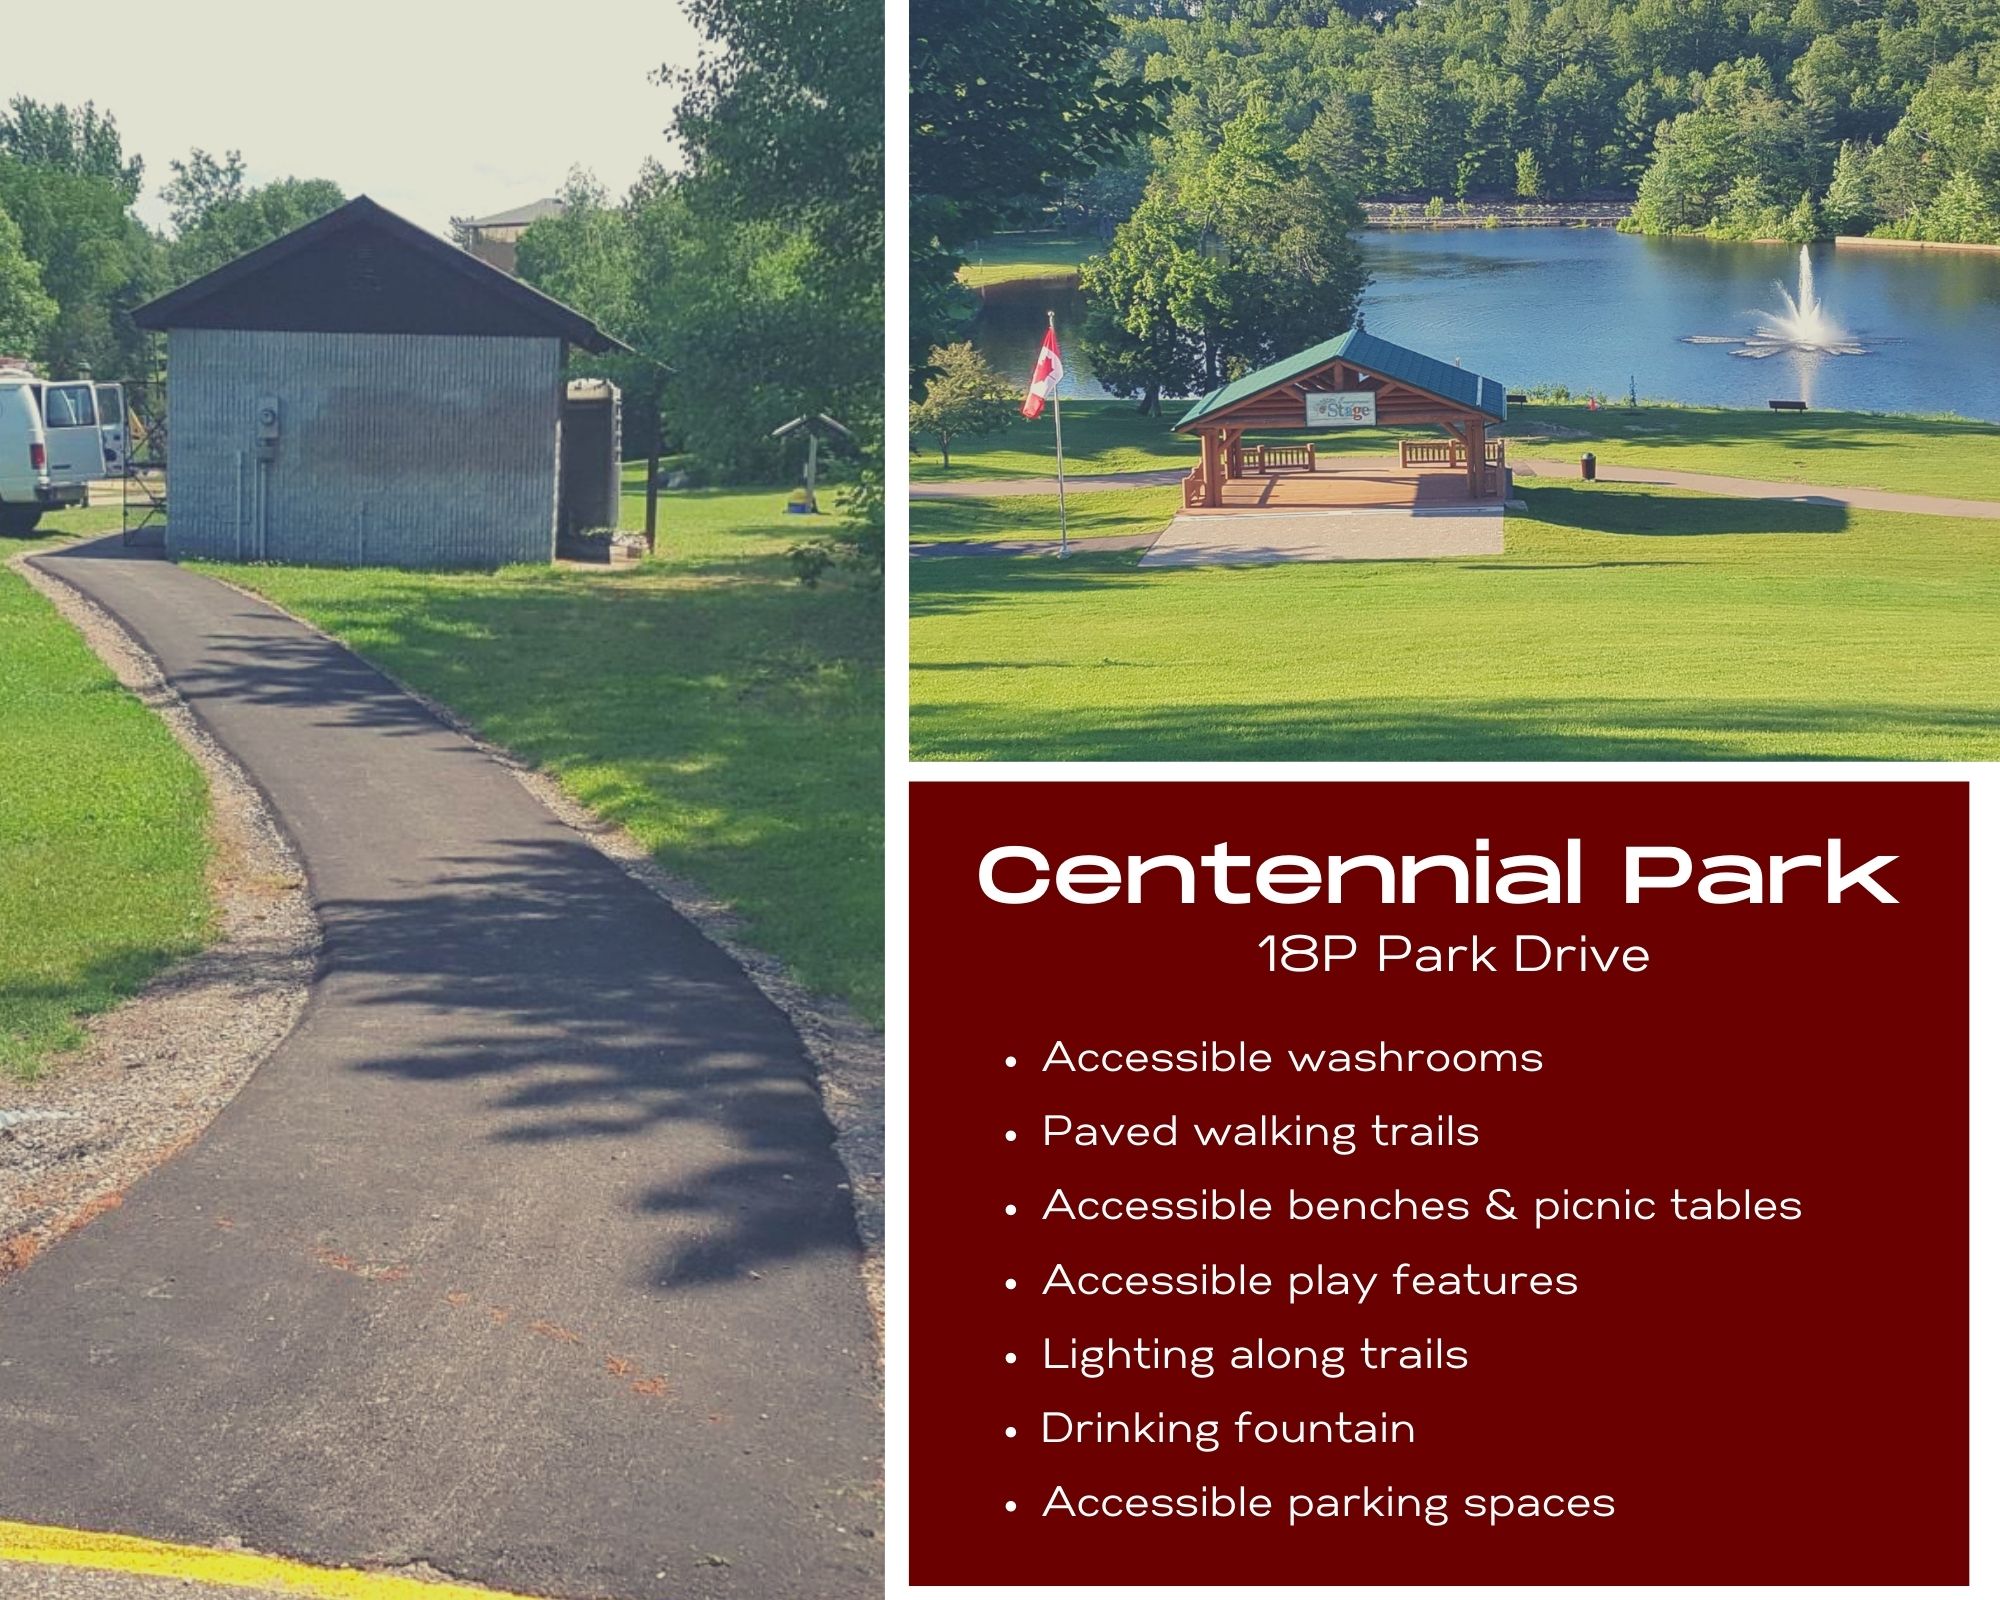 centennial park, accessible washrooms, staging area, accessible features